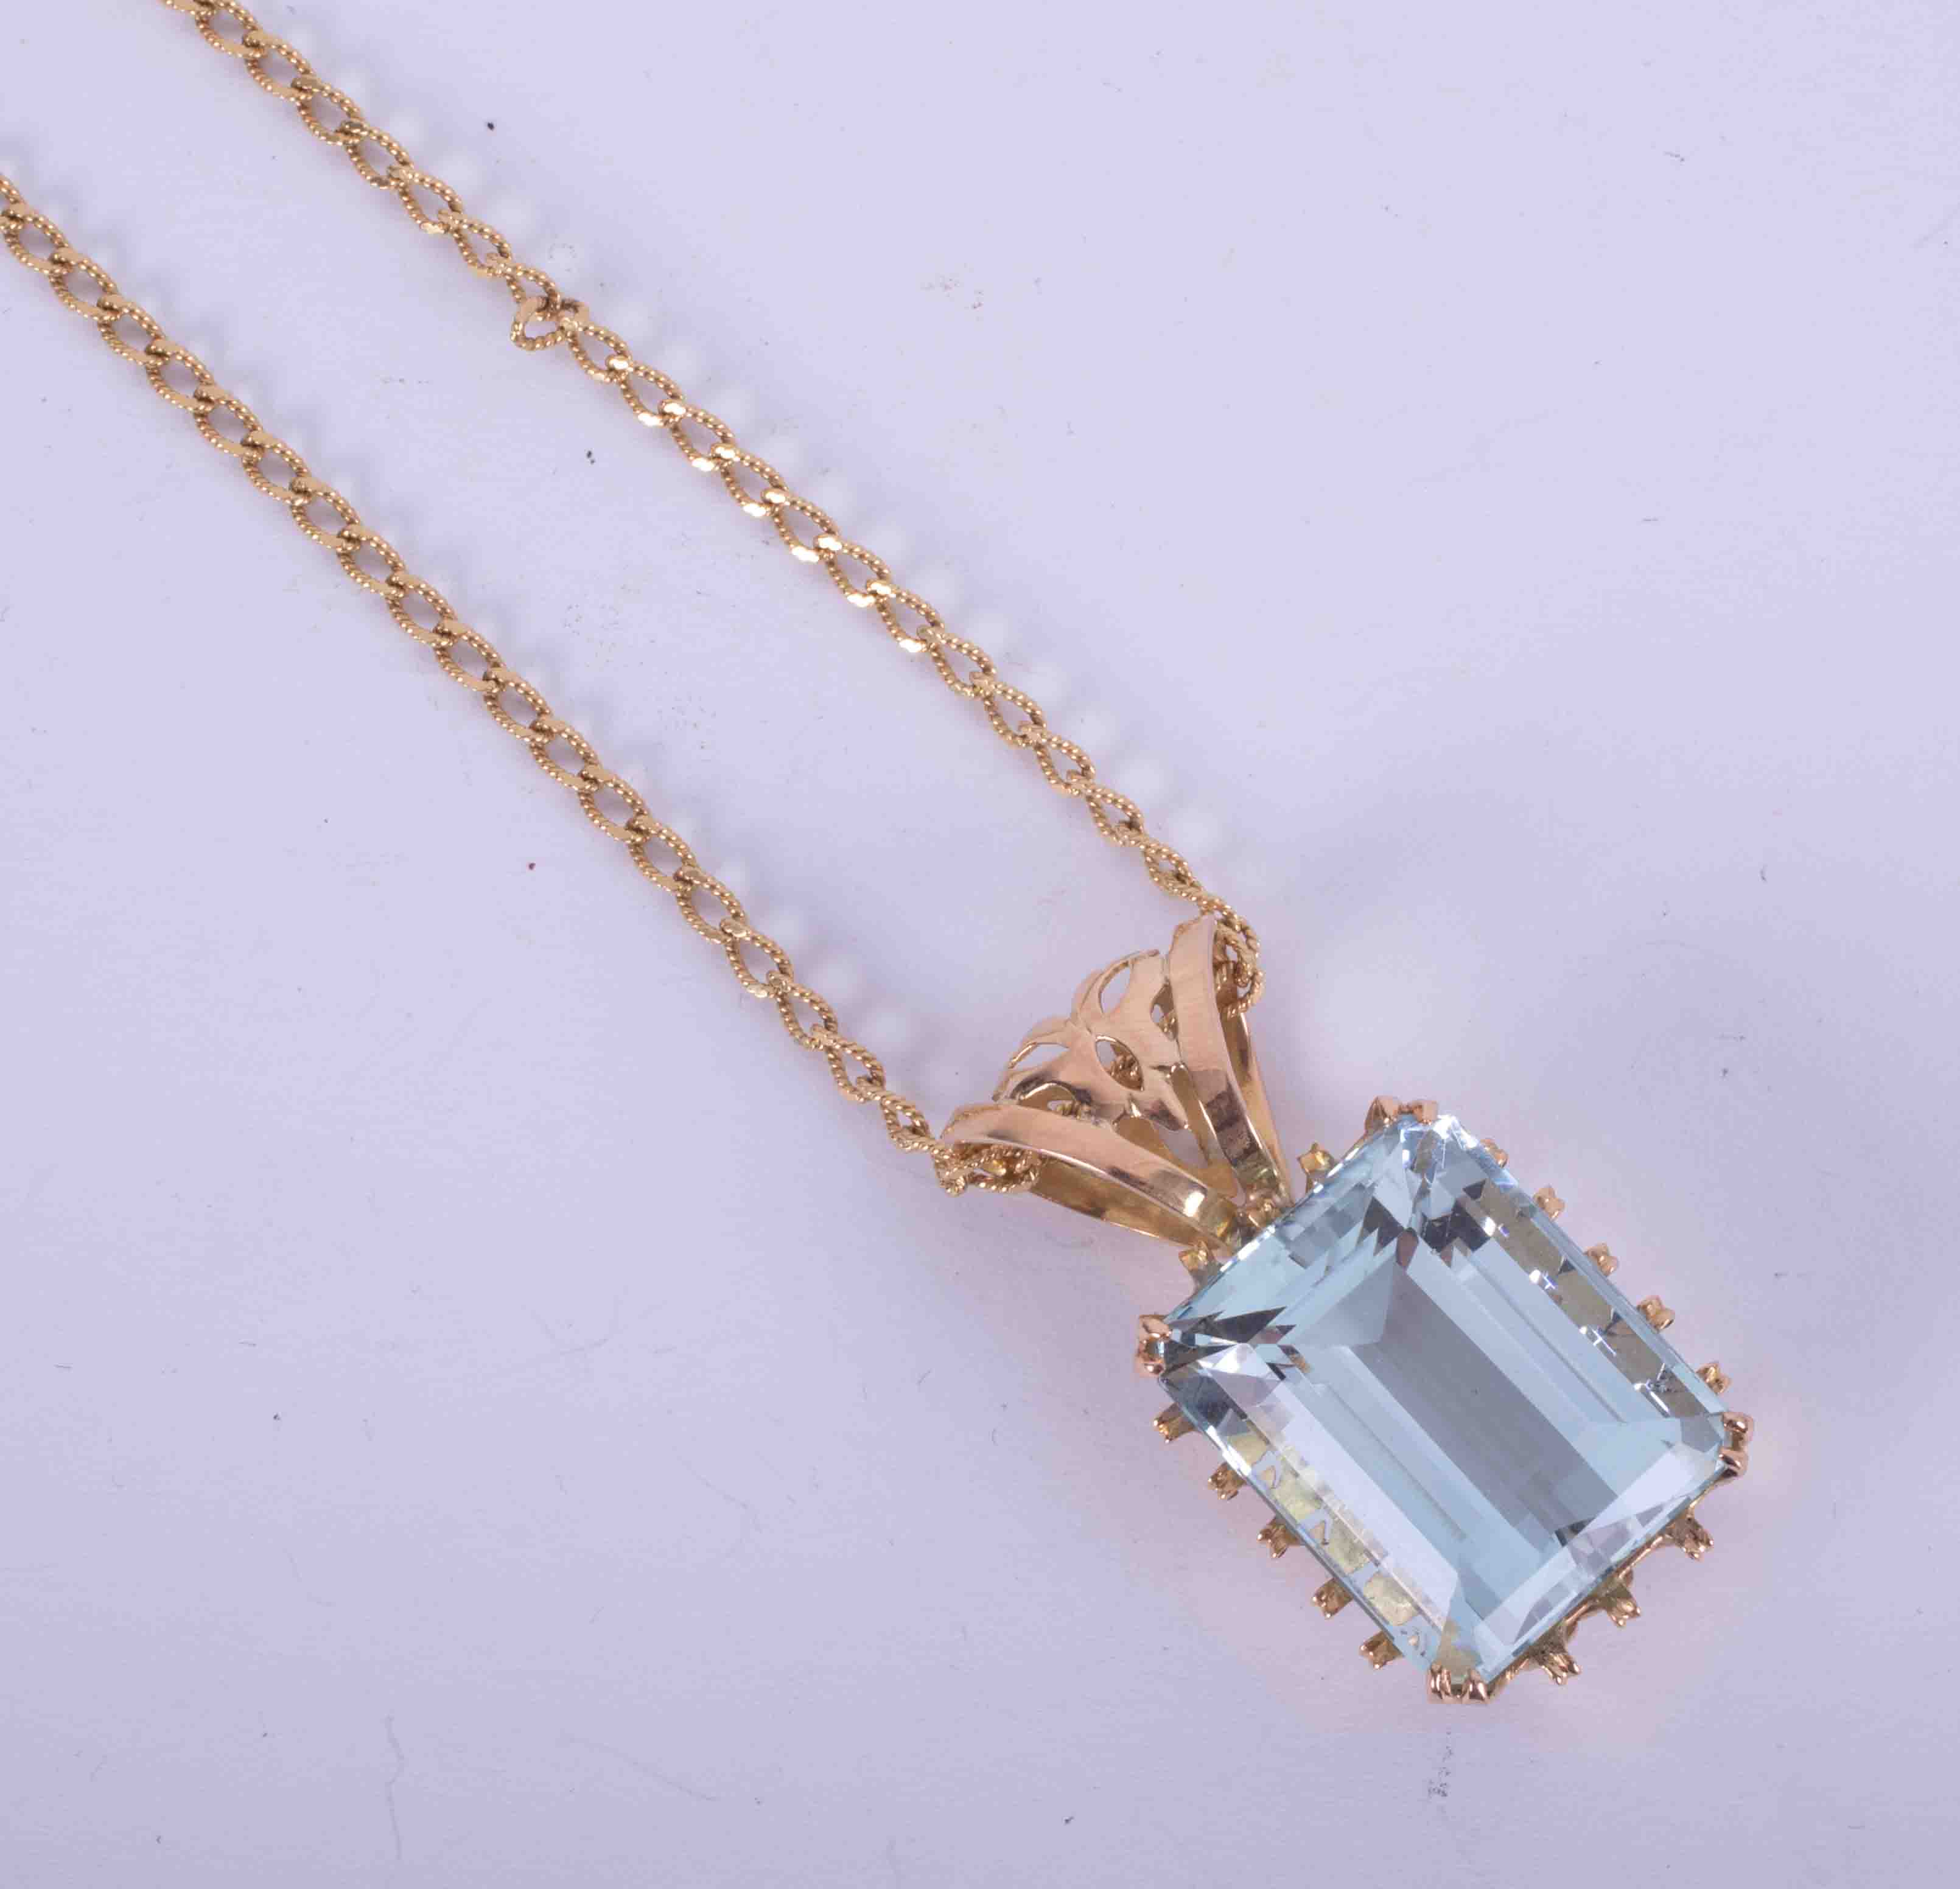 An impressive & ornate 18ct yellow gold pendant set approx. 30 carats of emerald cut Aquamarine with